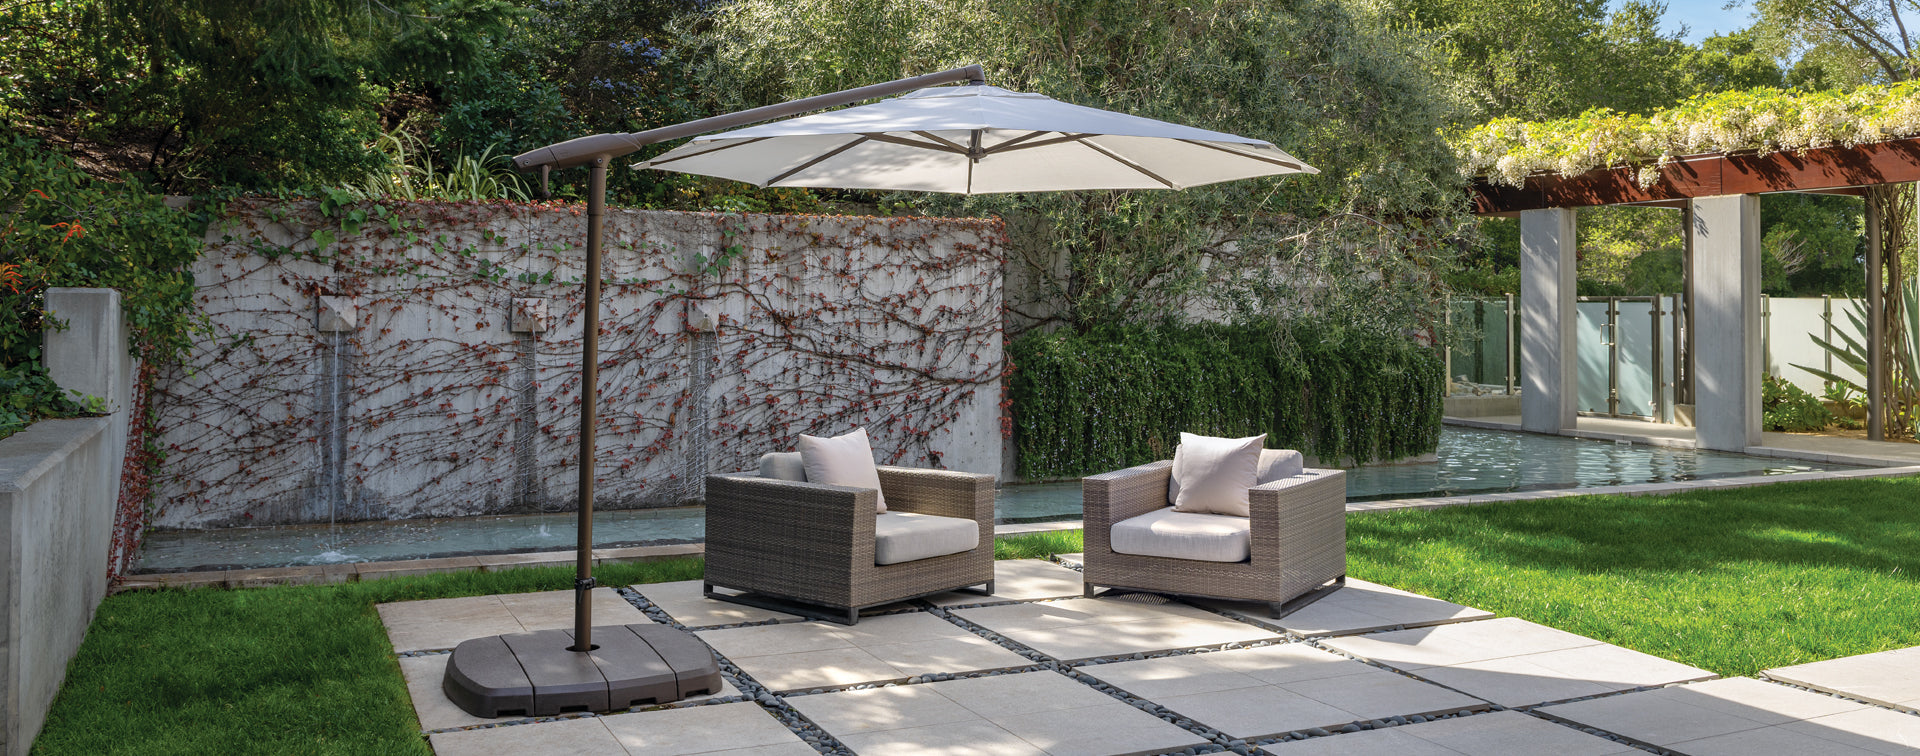 Photo of a large umbrella over 2 patio chairs.